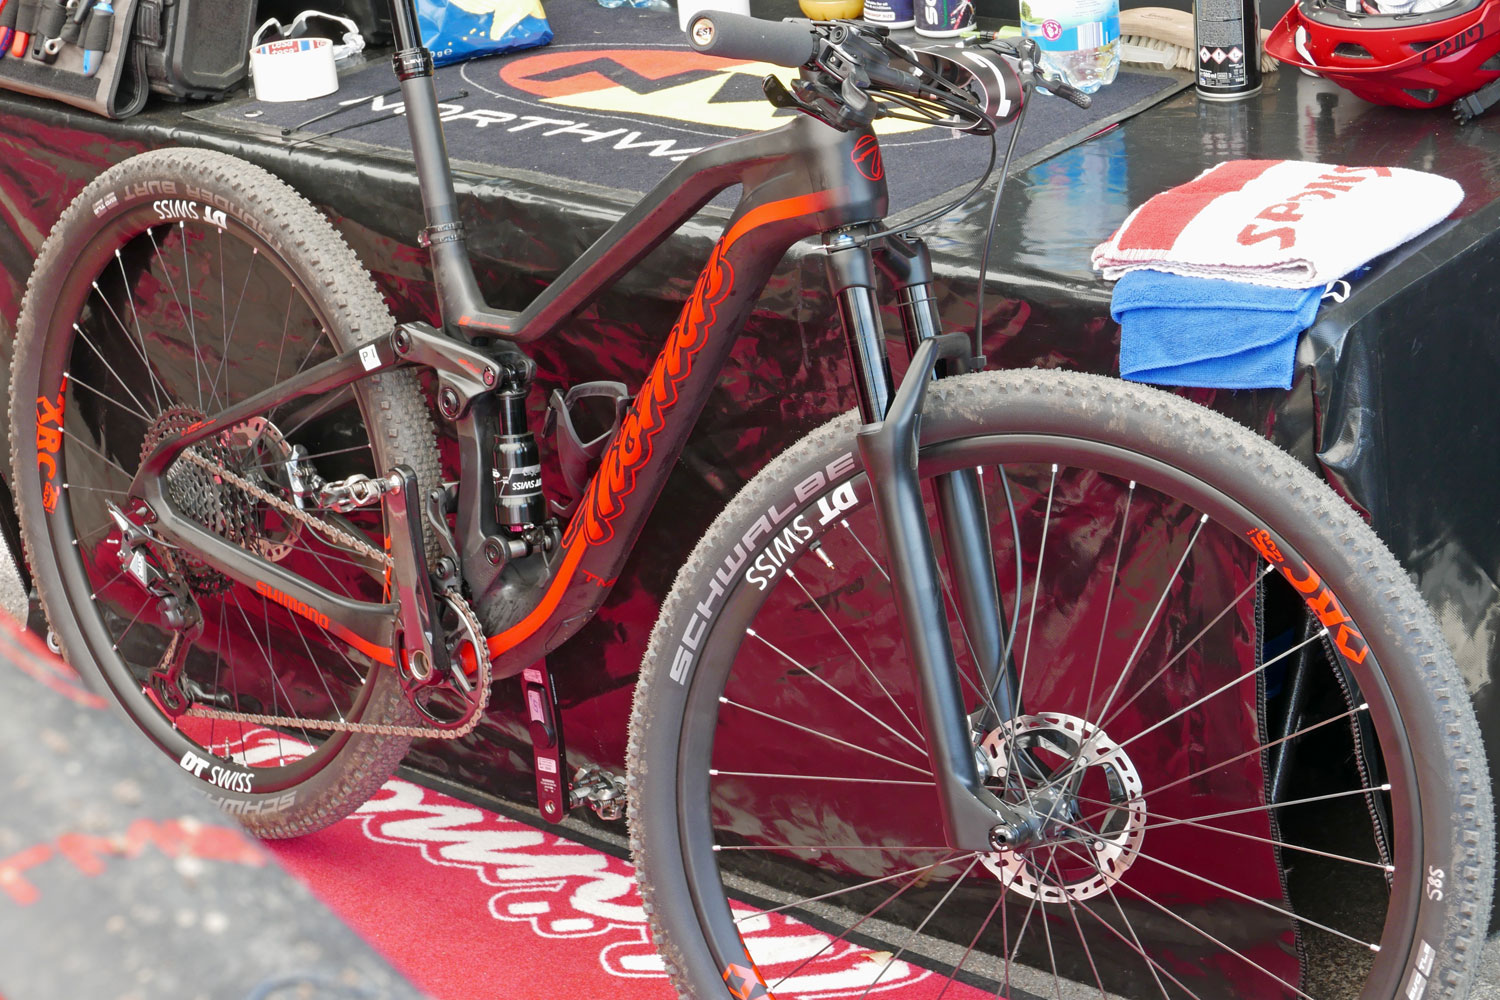 Spy Shot! Is this prototype the next DT Swiss XC mountain bike fork?